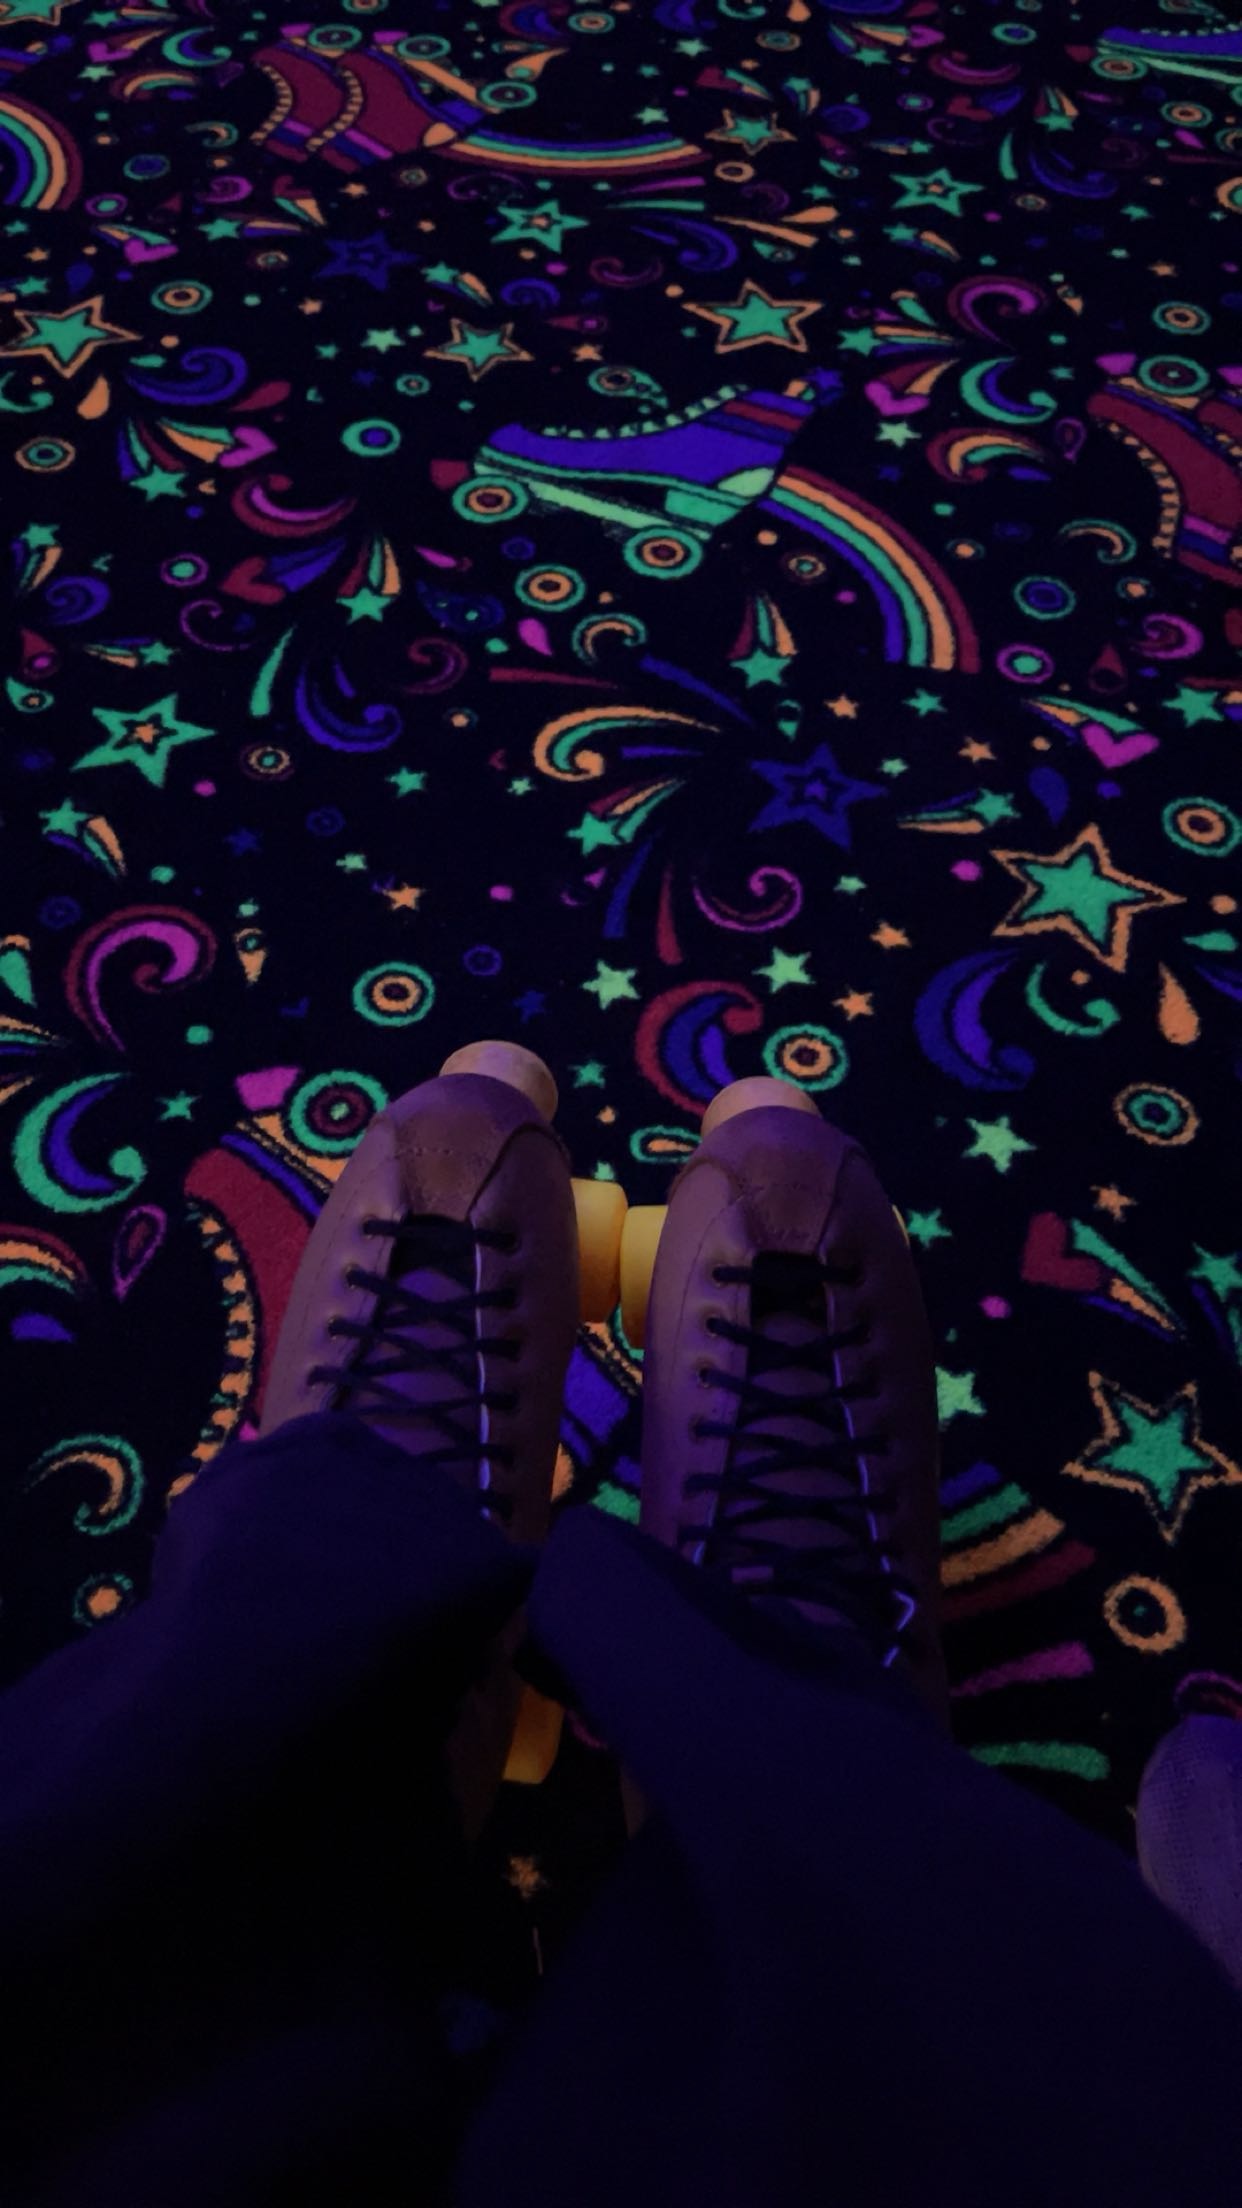 a person's feet on a carpet with colorful patterns